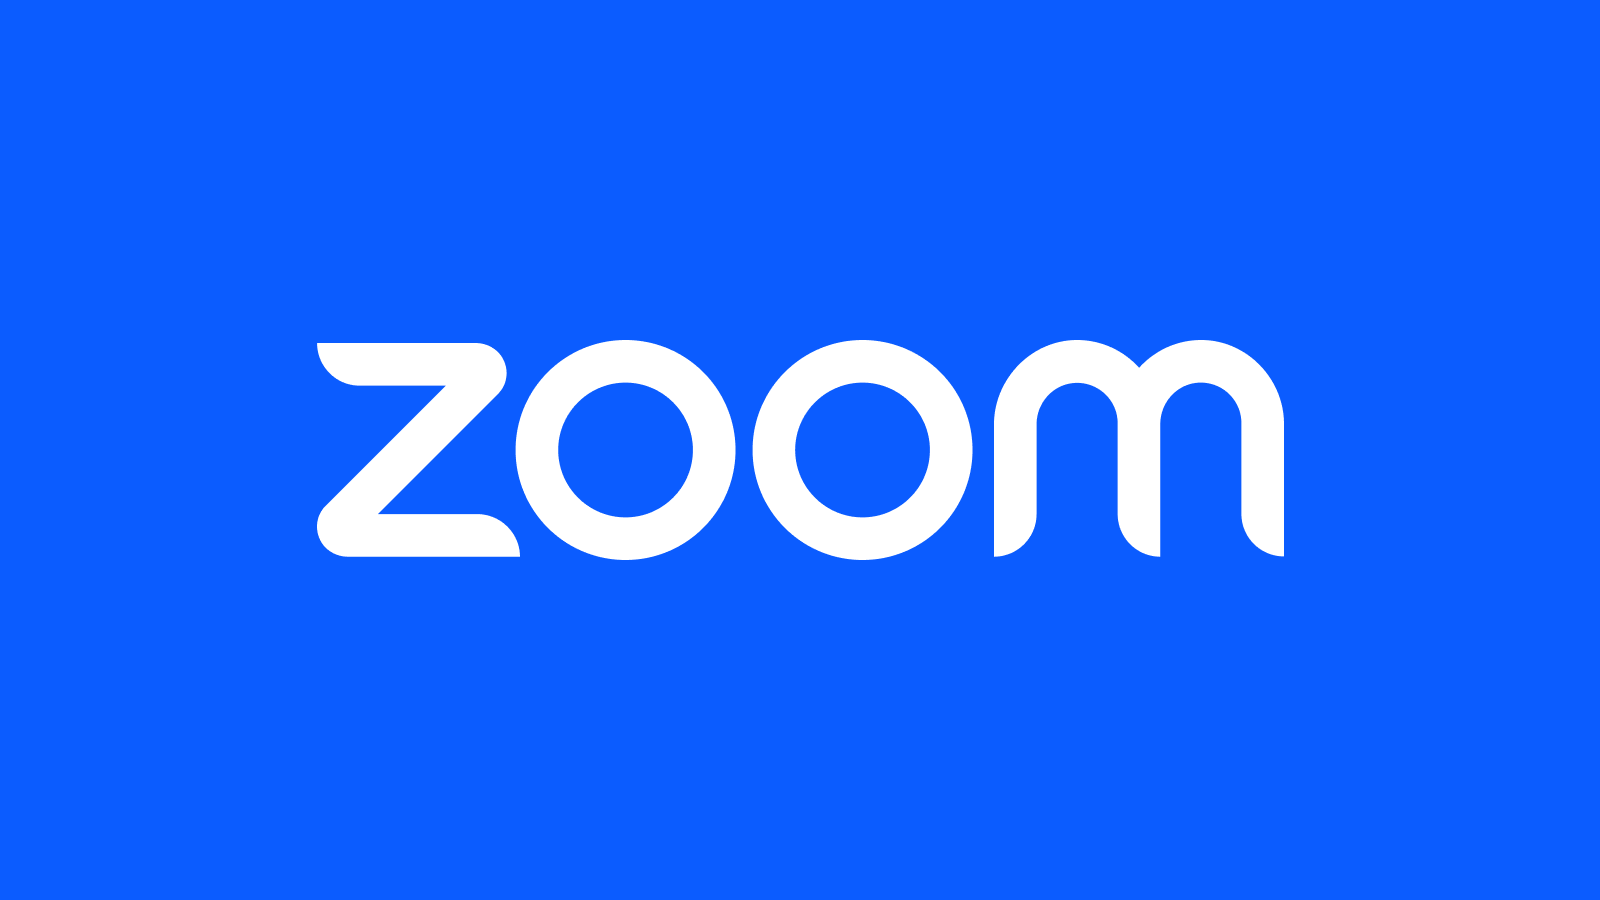 How Zoom’s terms of service and practices apply to AI features